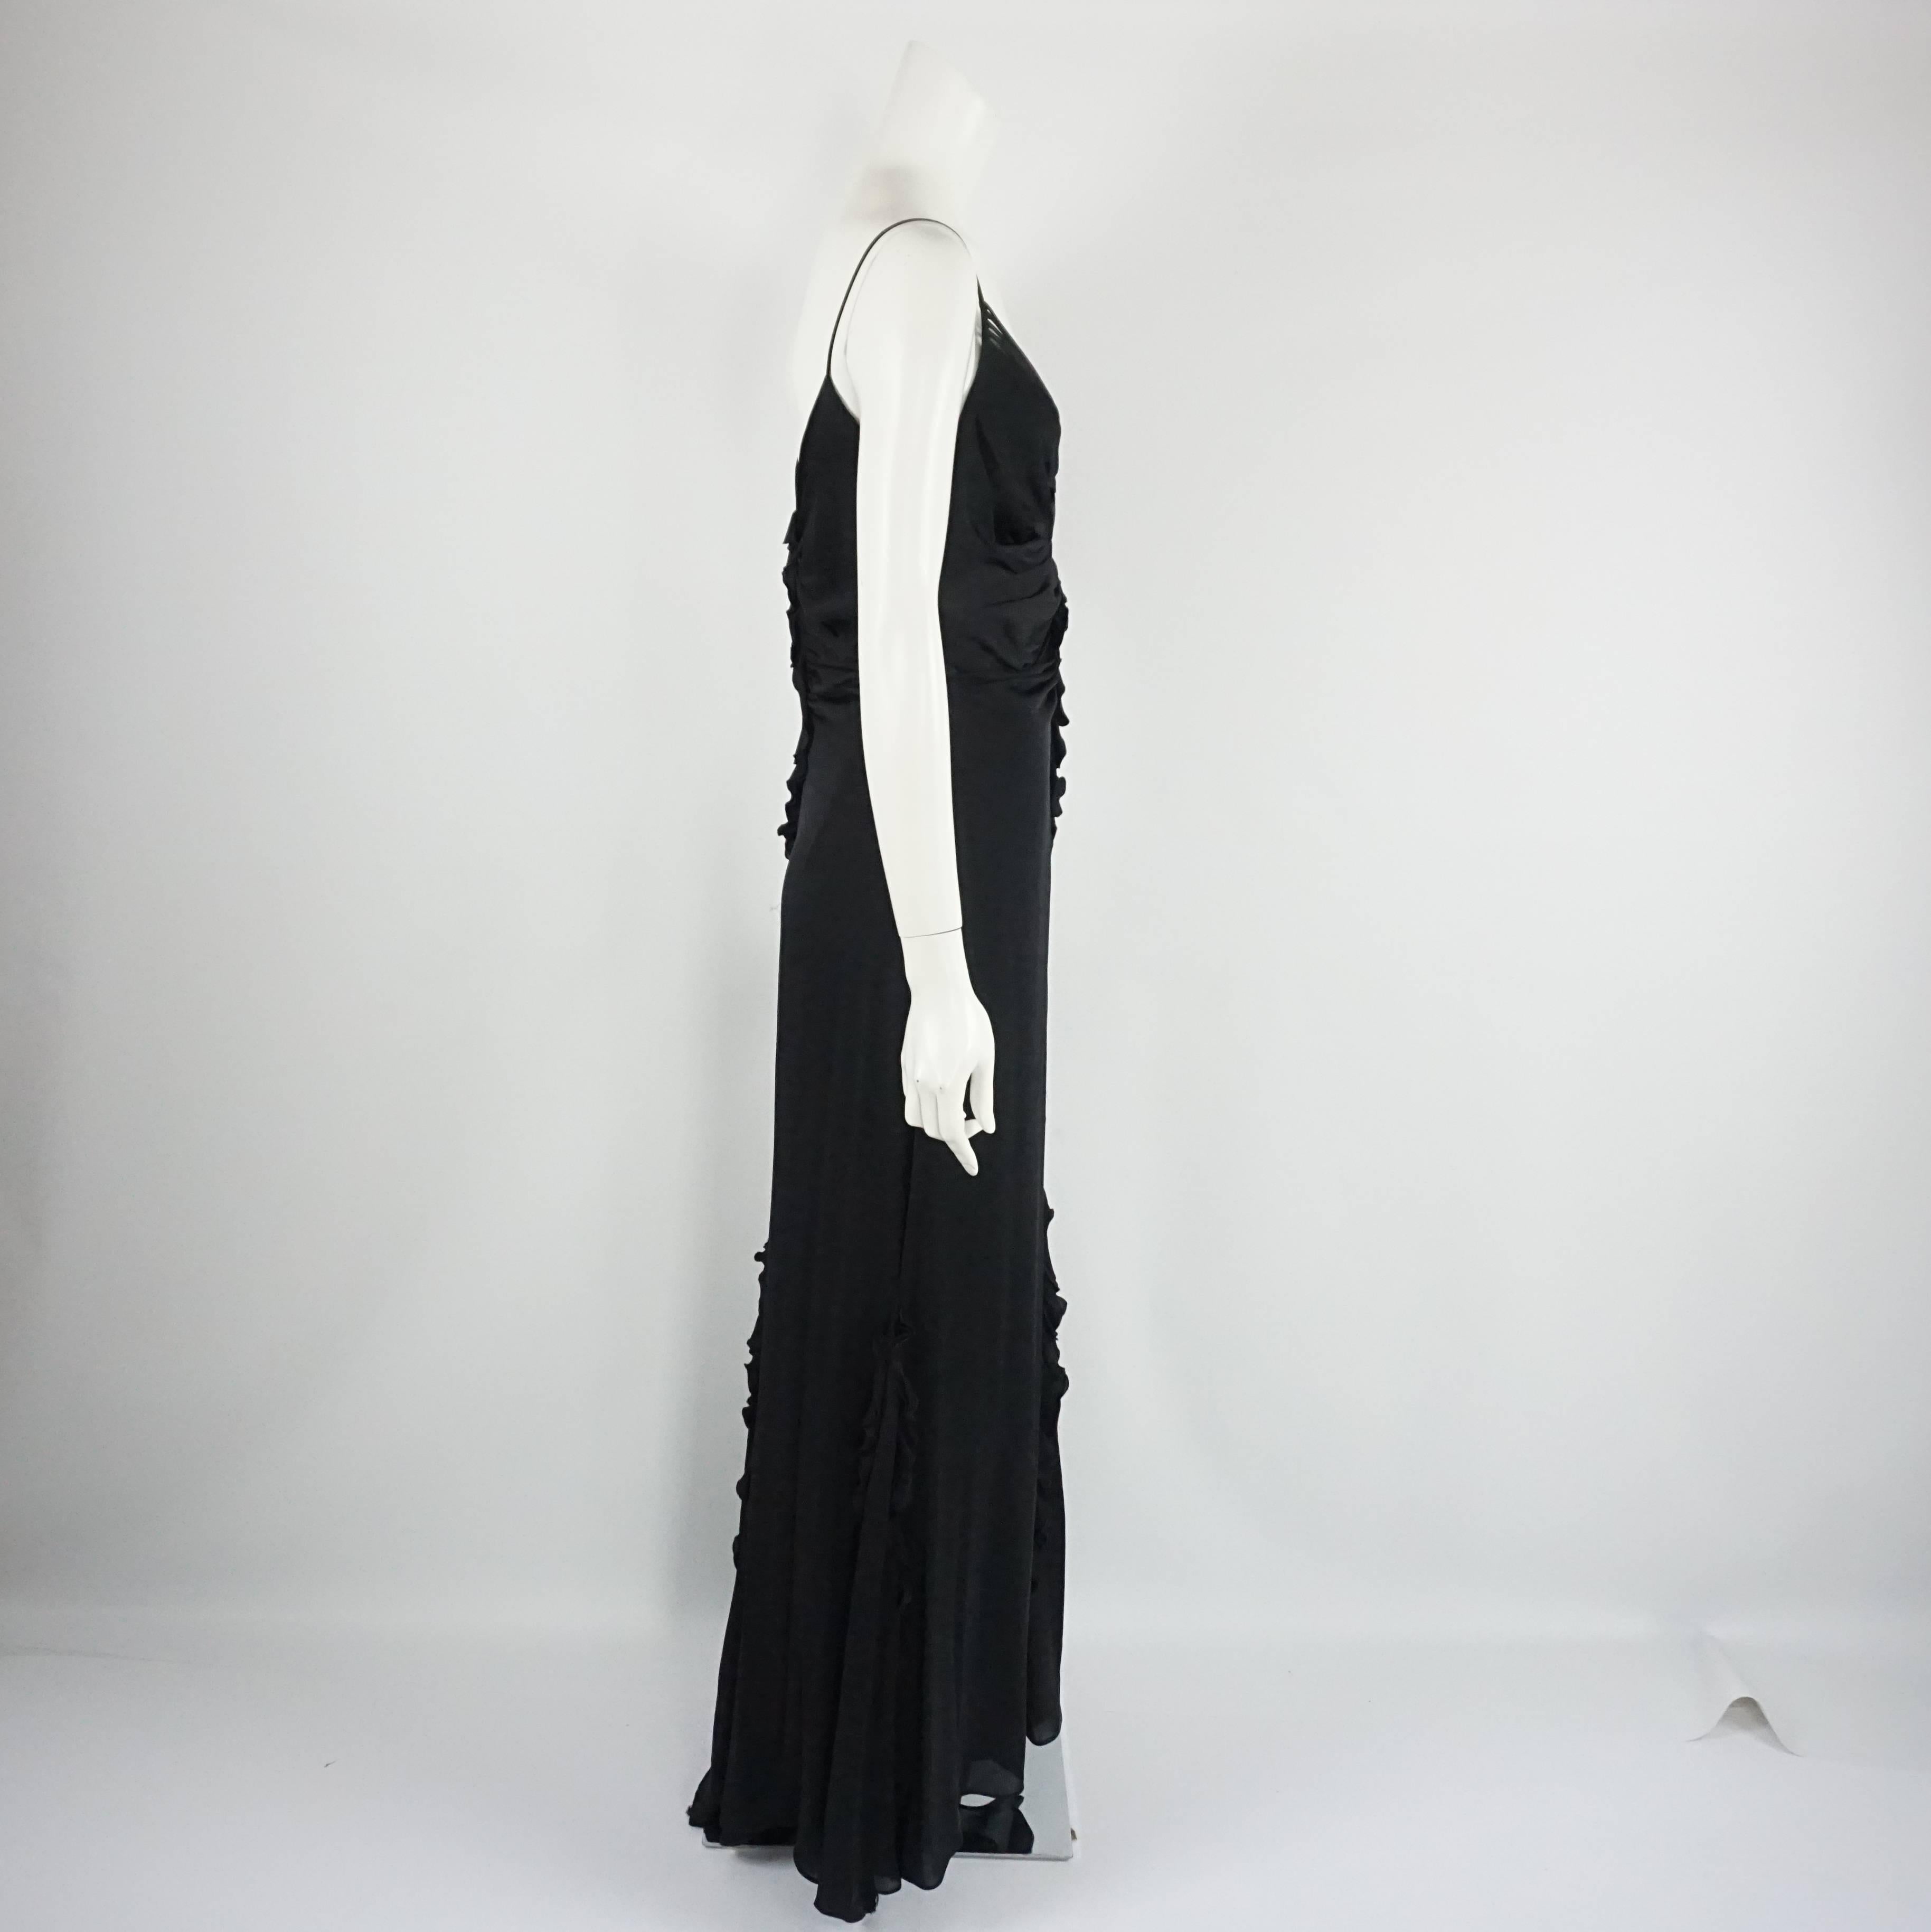 Badgley Mischka Black Jersey Ruched Gown - 10. This Badgley Mischka black jersey gown is the perfect evening gown. It features ruching near the bust and waist, a lace-up style bust detail, bottom ruffles, and a bustle option. The gown is in very